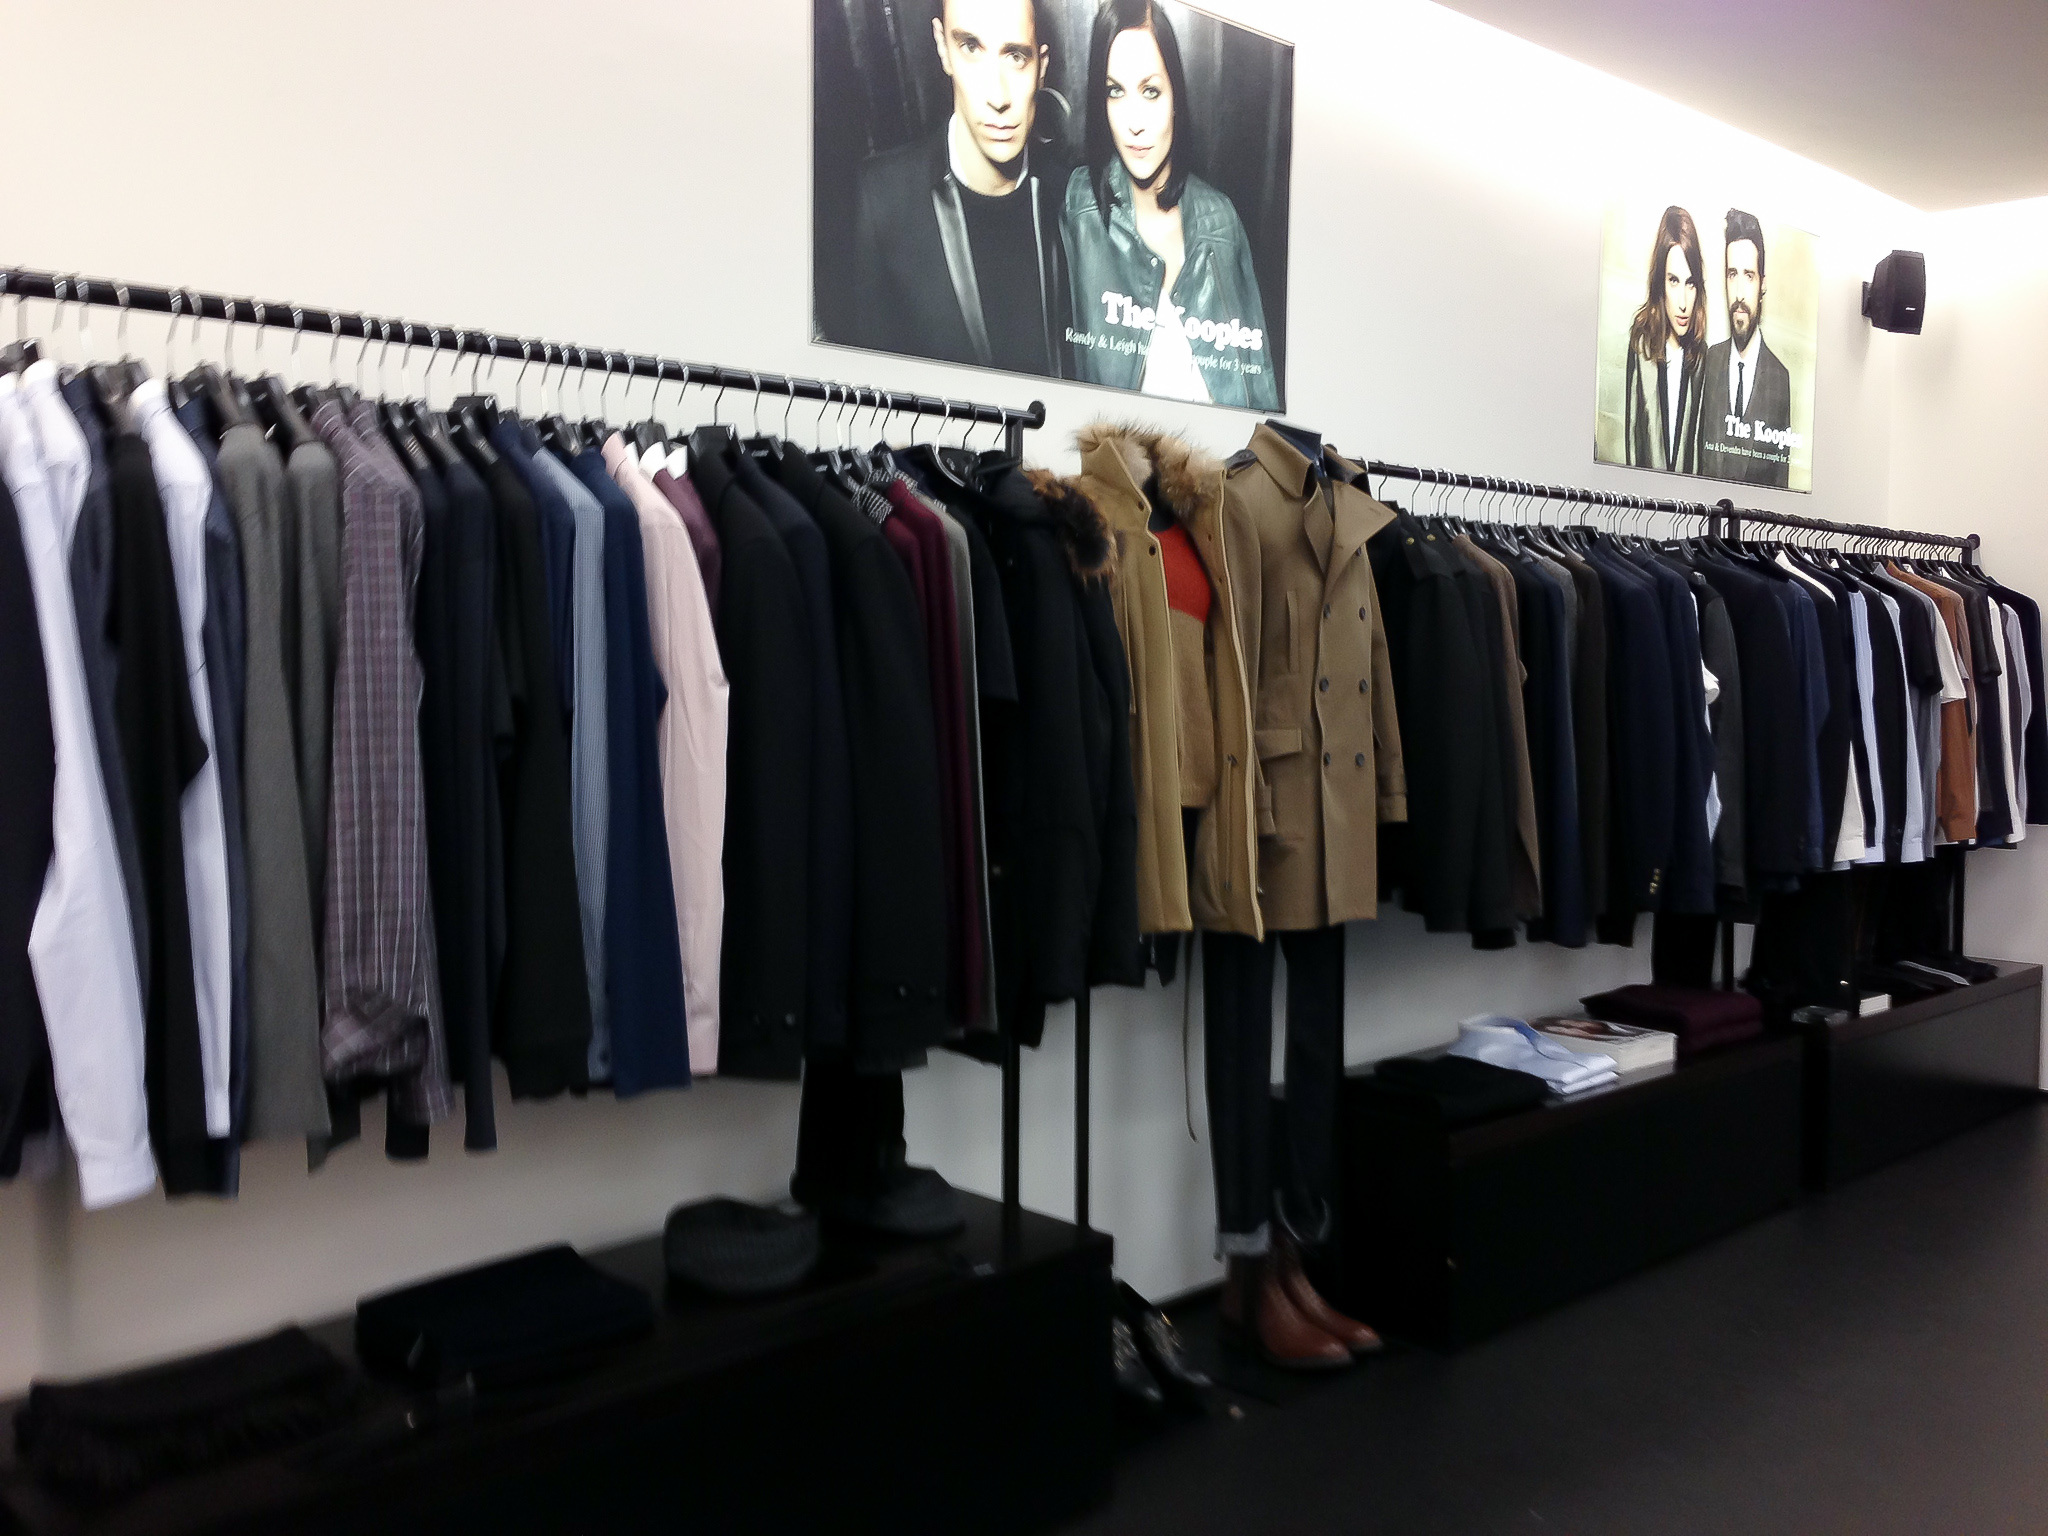 Fashion display at The Kooples in London. Photo by alphacityguides.